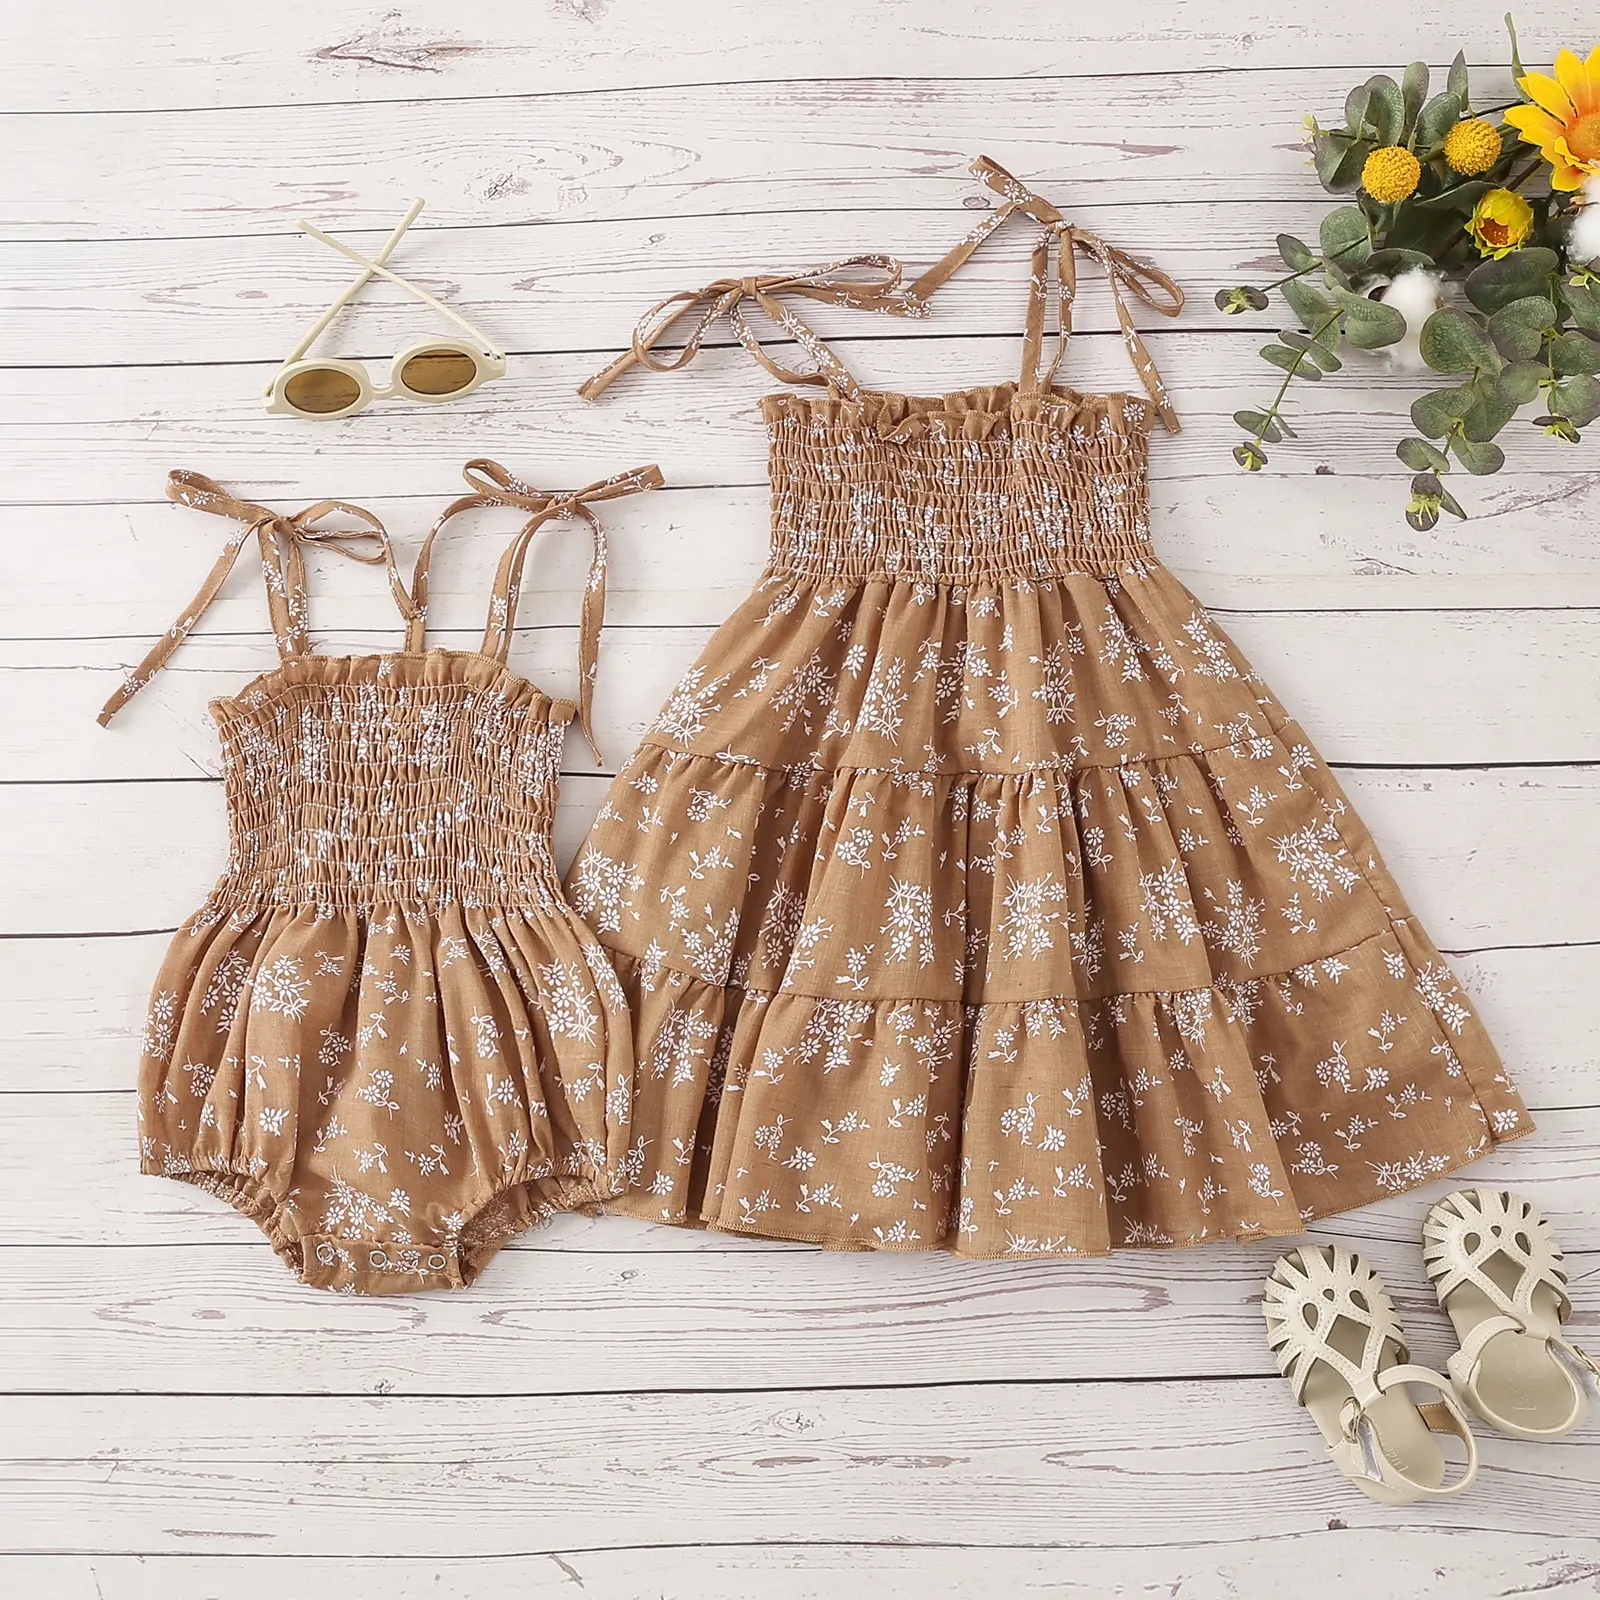 matching sibling sisters sets Bubble Romper or Dress for baby toddler girls linen floral summer outfits